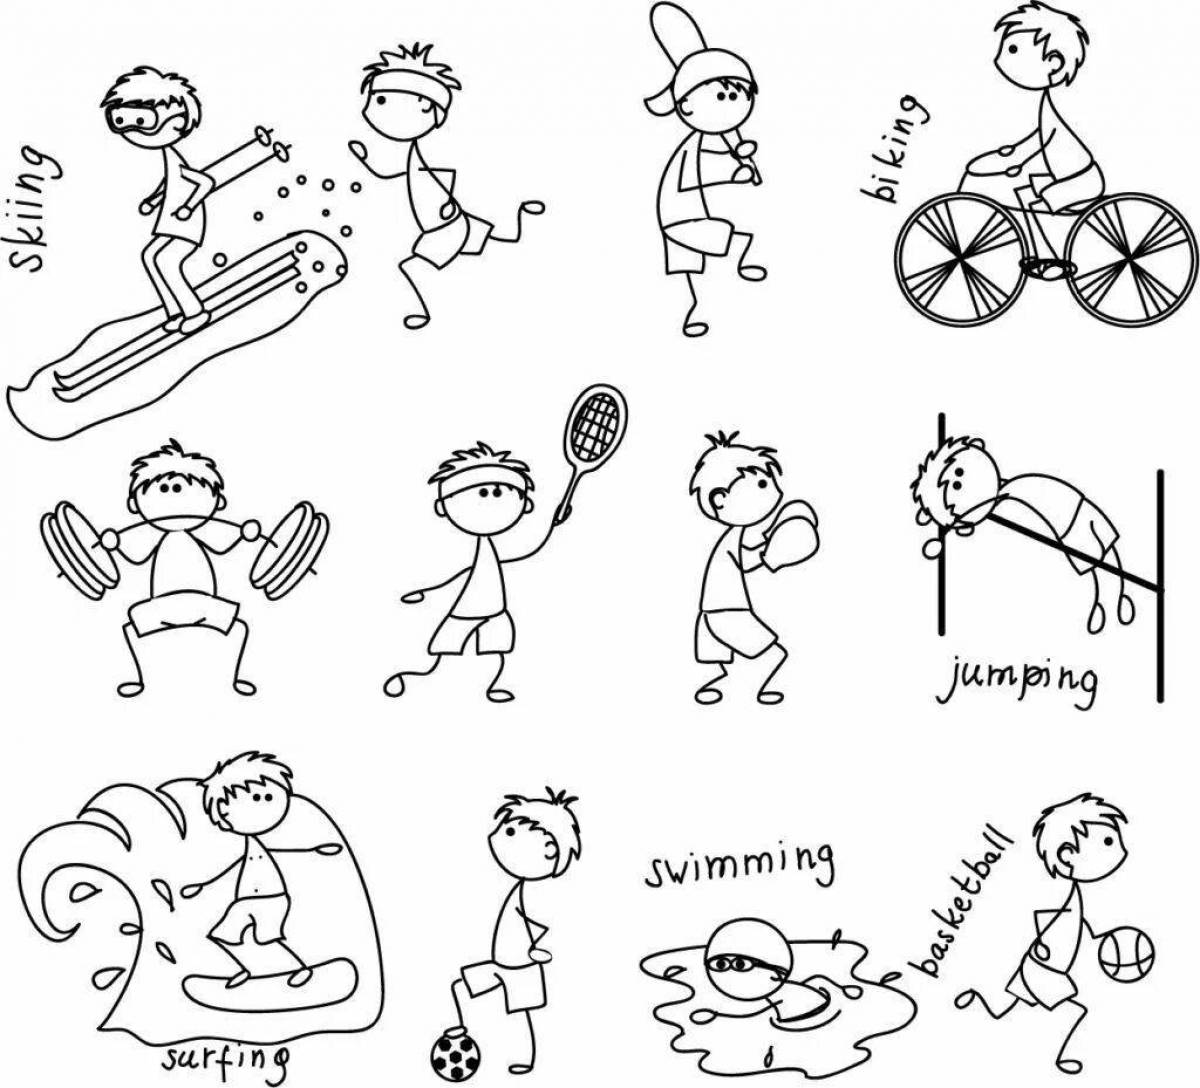 Dynamic coloring of athletes of various sports for children